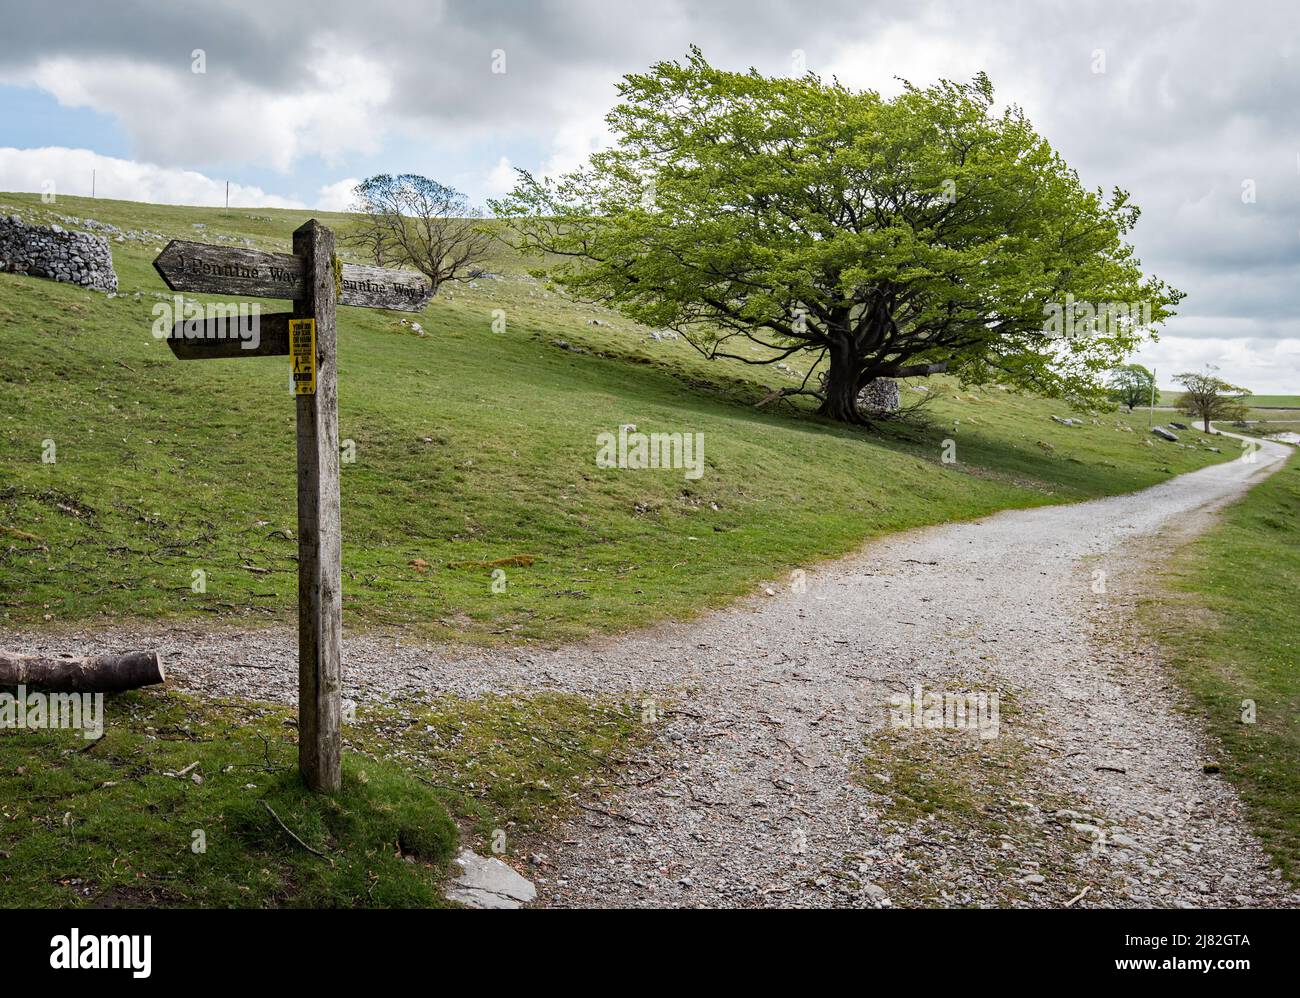 Part of the Pennine Way that runs along the edge of Malham Tarn. The   track enters woodland (the latter is part of the Field Study Centre grounds). Stock Photo